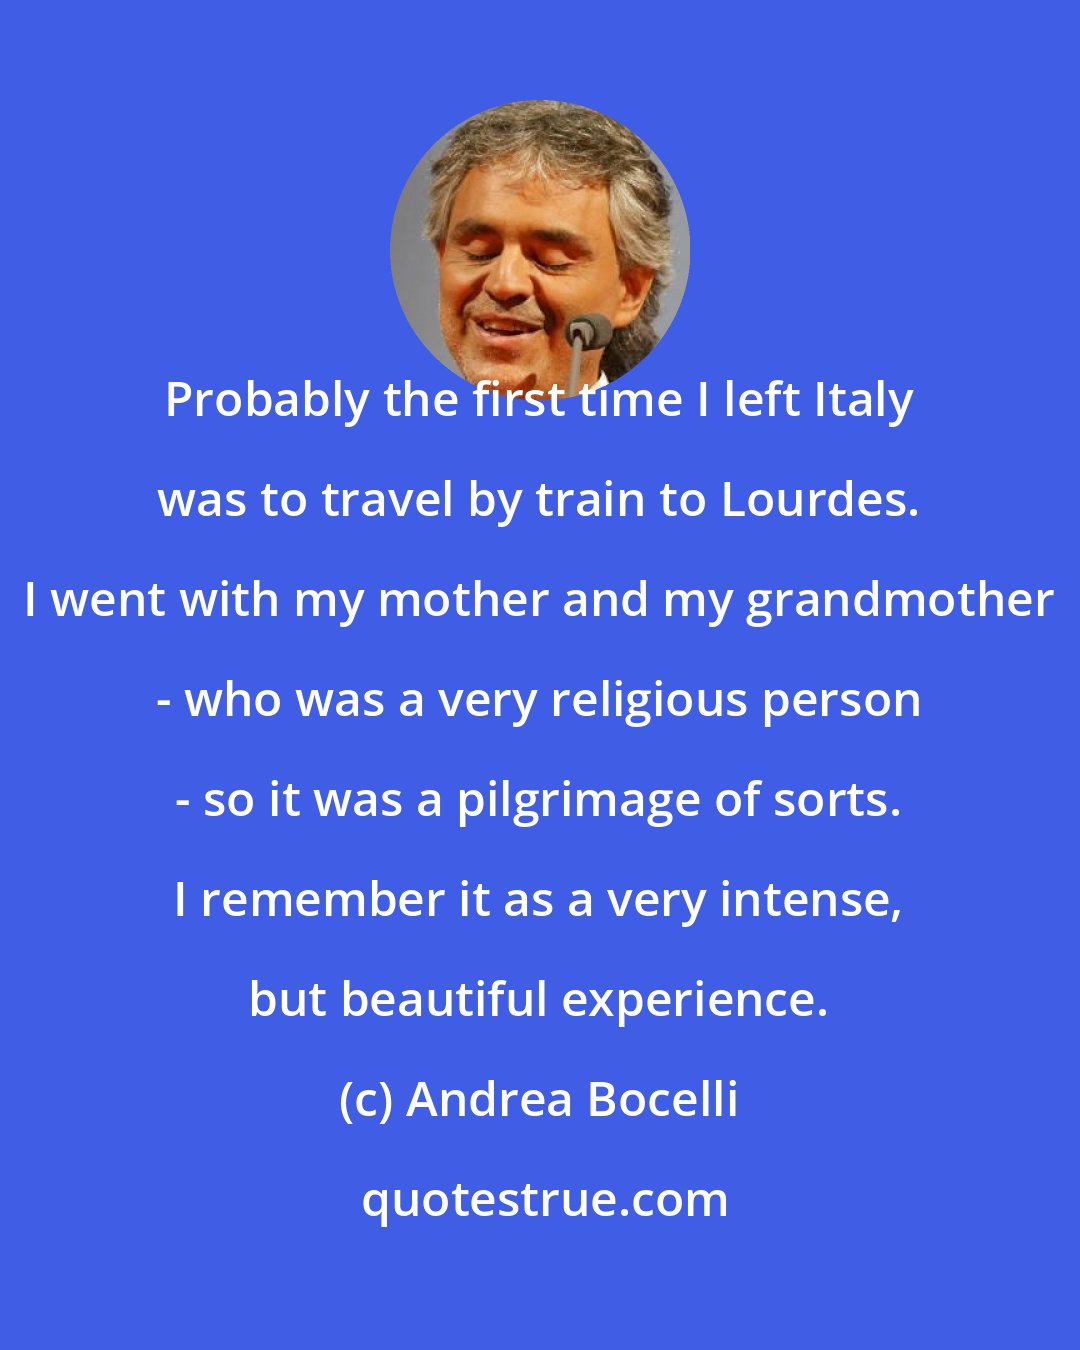 Andrea Bocelli: Probably the first time I left Italy was to travel by train to Lourdes. I went with my mother and my grandmother - who was a very religious person - so it was a pilgrimage of sorts. I remember it as a very intense, but beautiful experience.